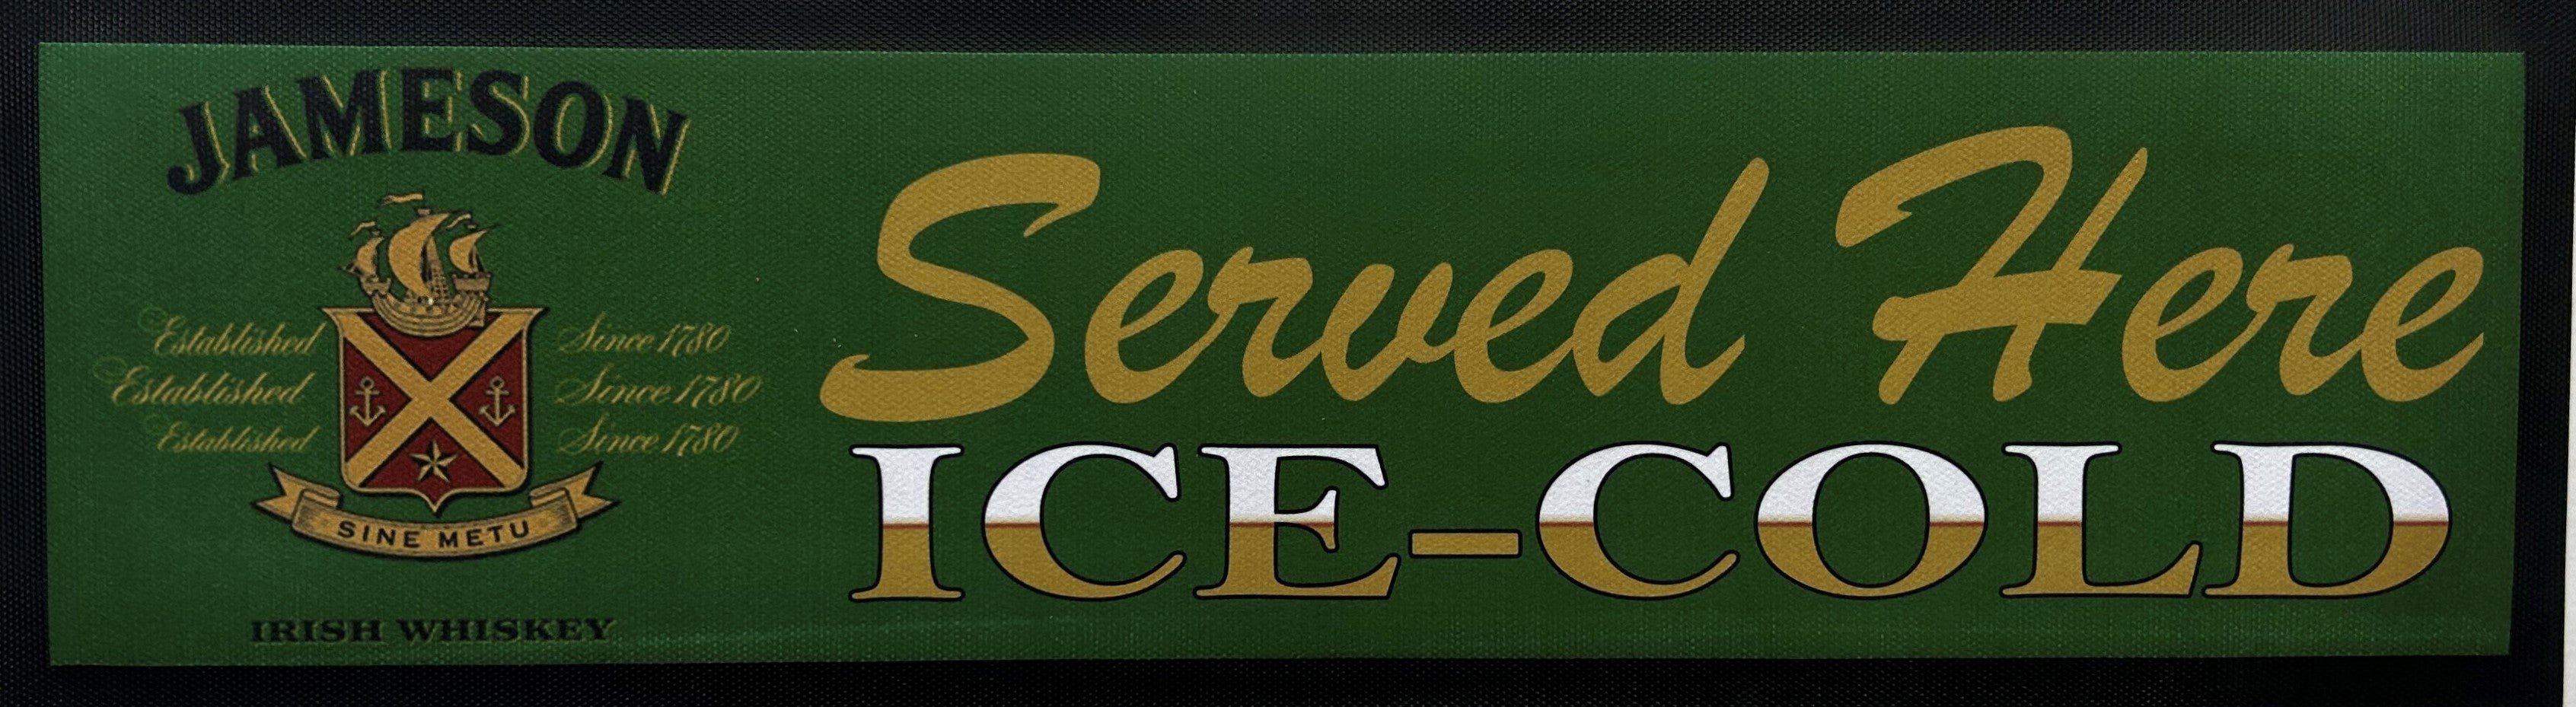 Jameson "Served Here Ice Cold" Premium Rubber-Backed Bar Mat Runner - KING CAVE